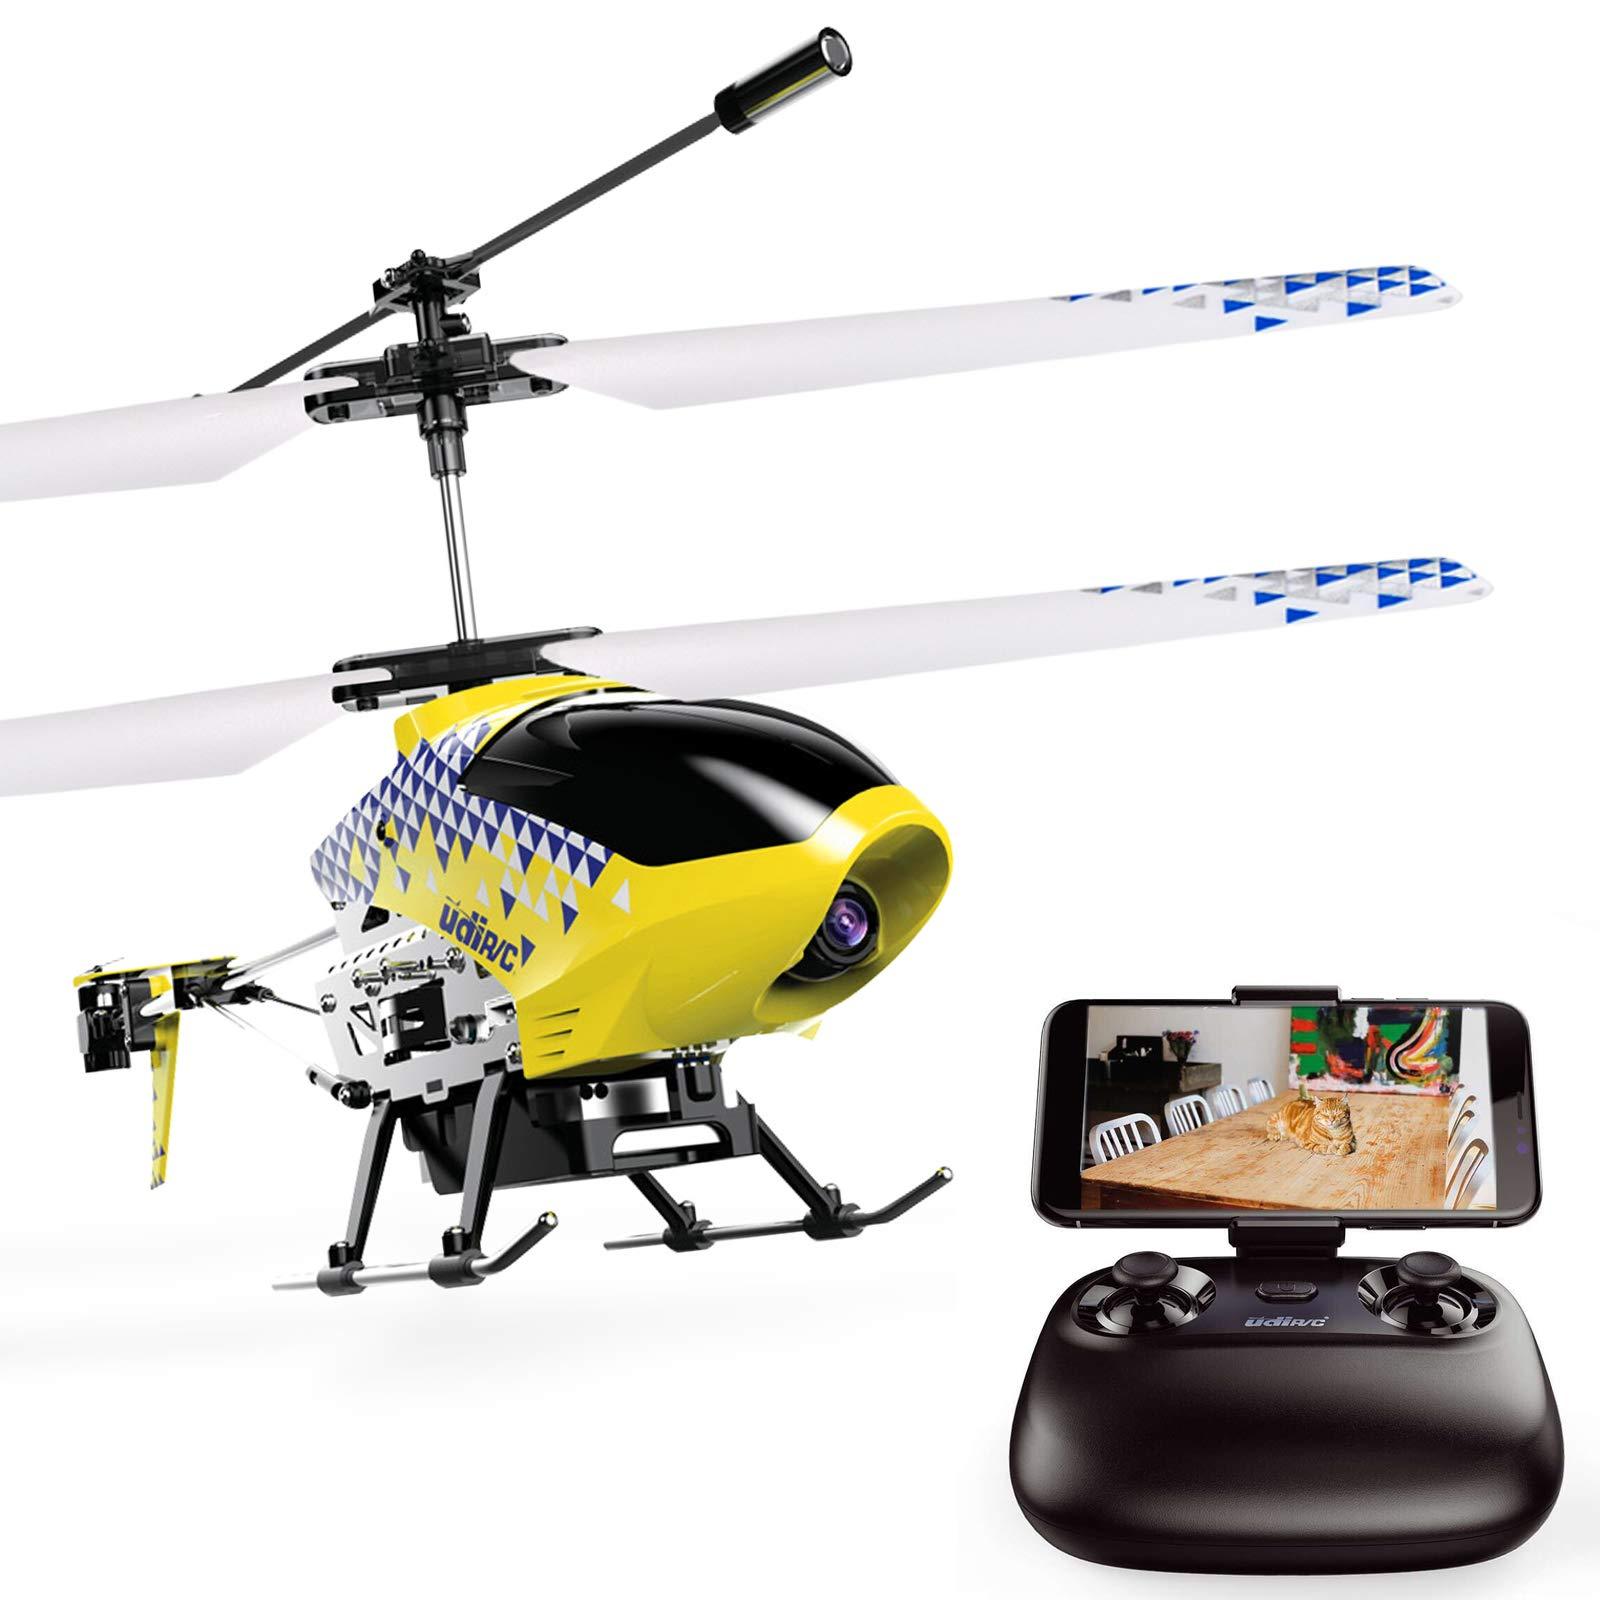 Remote Helicopter Order: Enhance your child's skills with a remote helicopter order